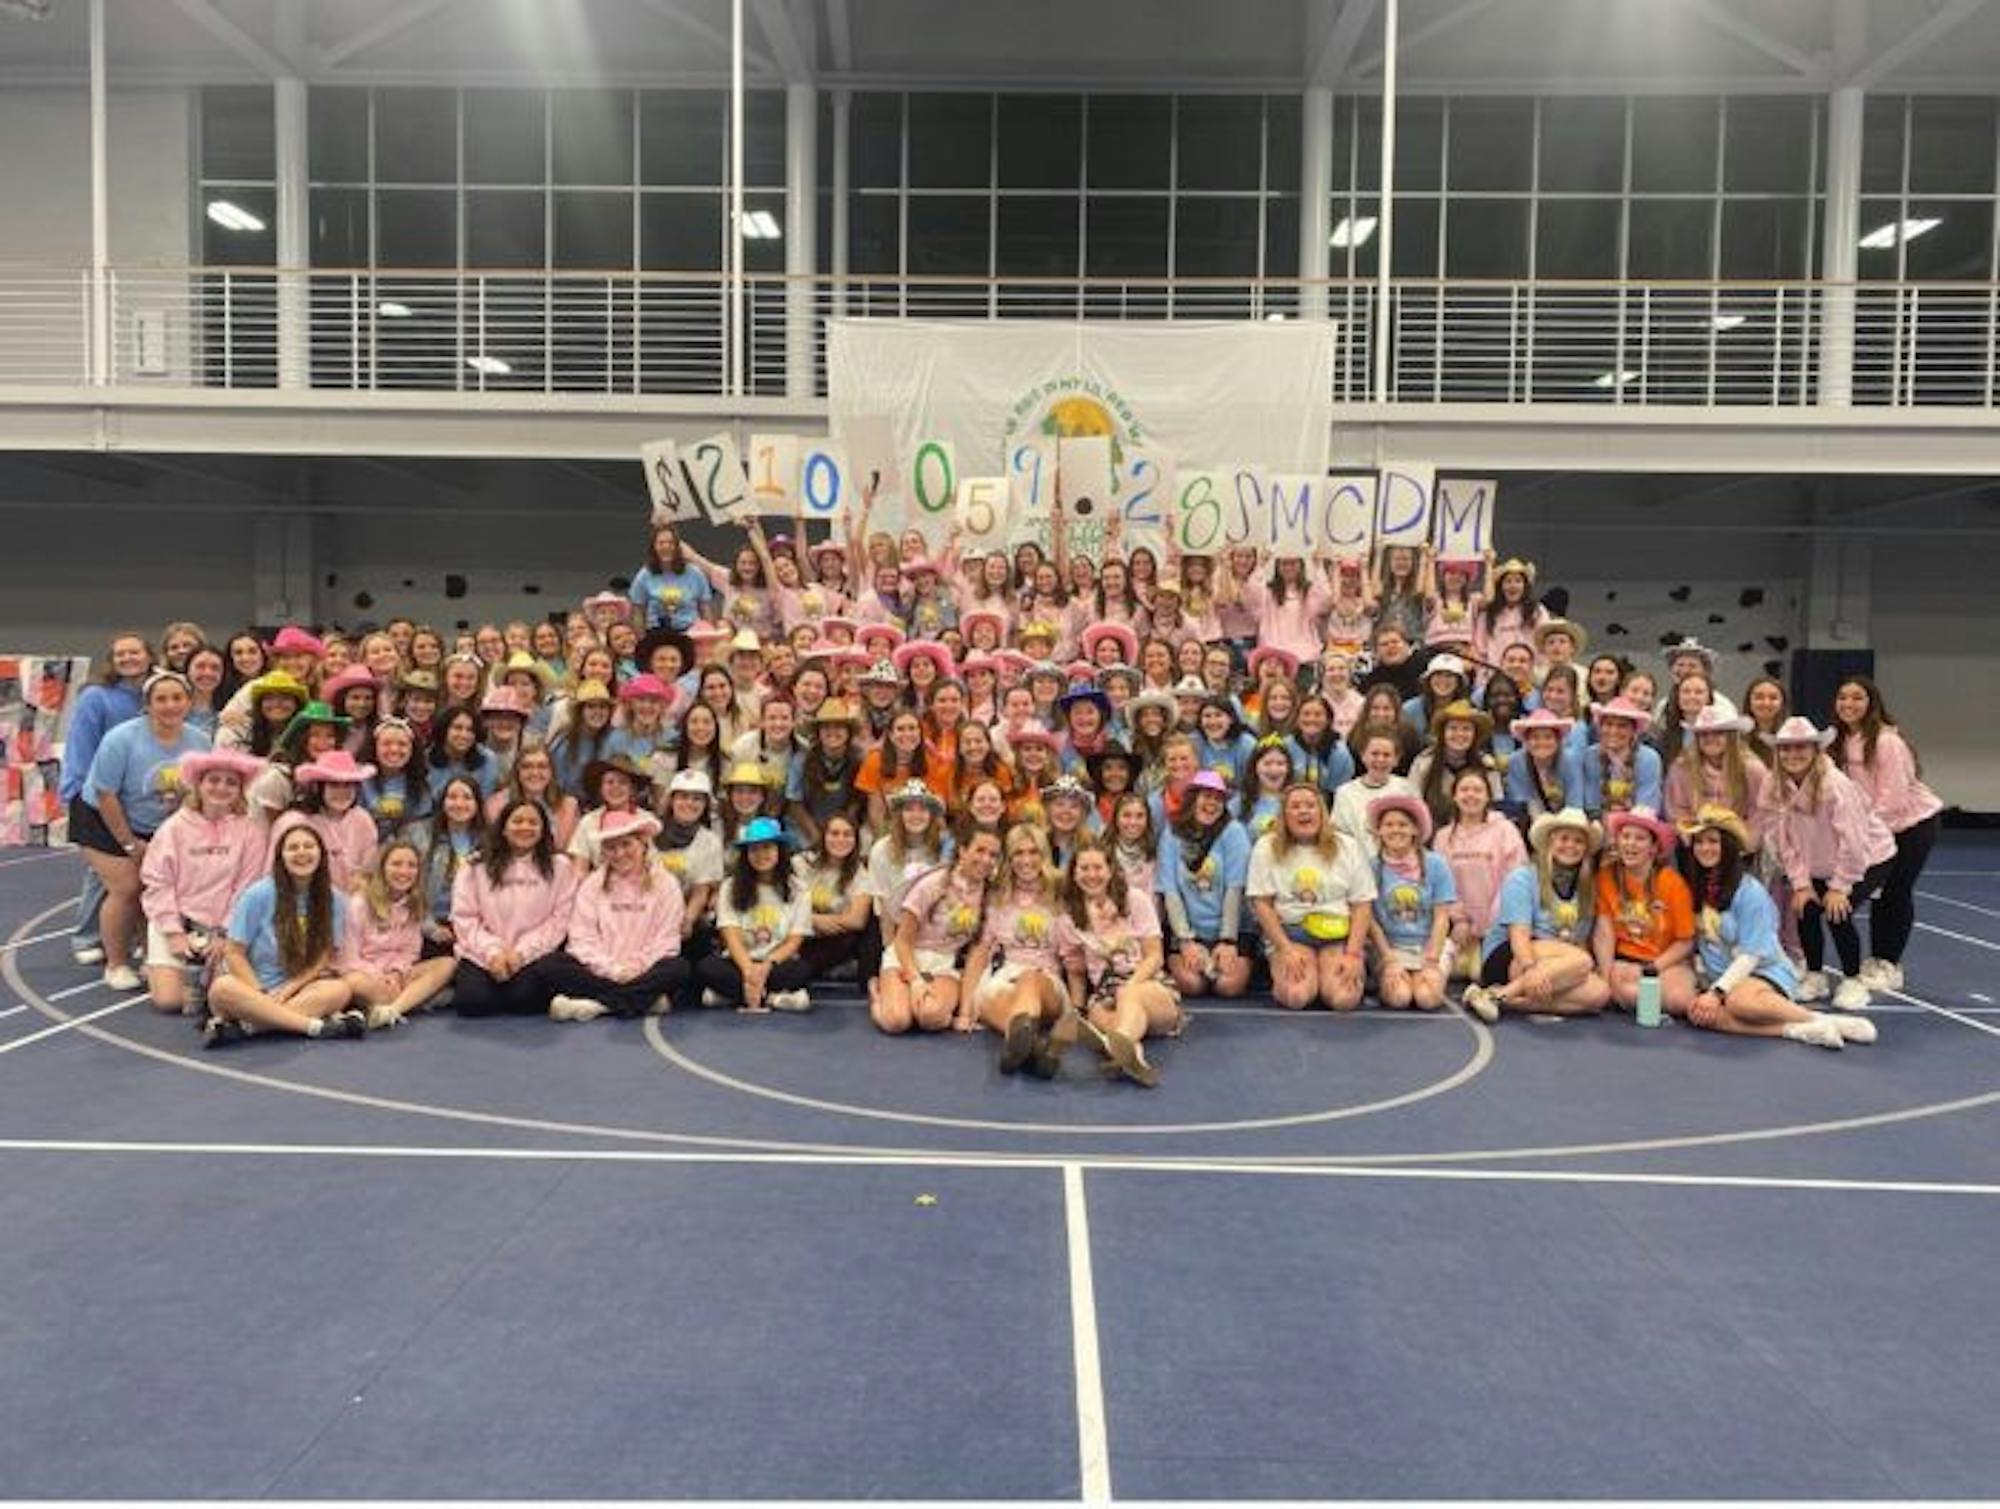 After 12 hours of dancing and fundraising for Riley Children's Hospital the Saint Mary's College Dance Marathon members and participants pose with final donation total.